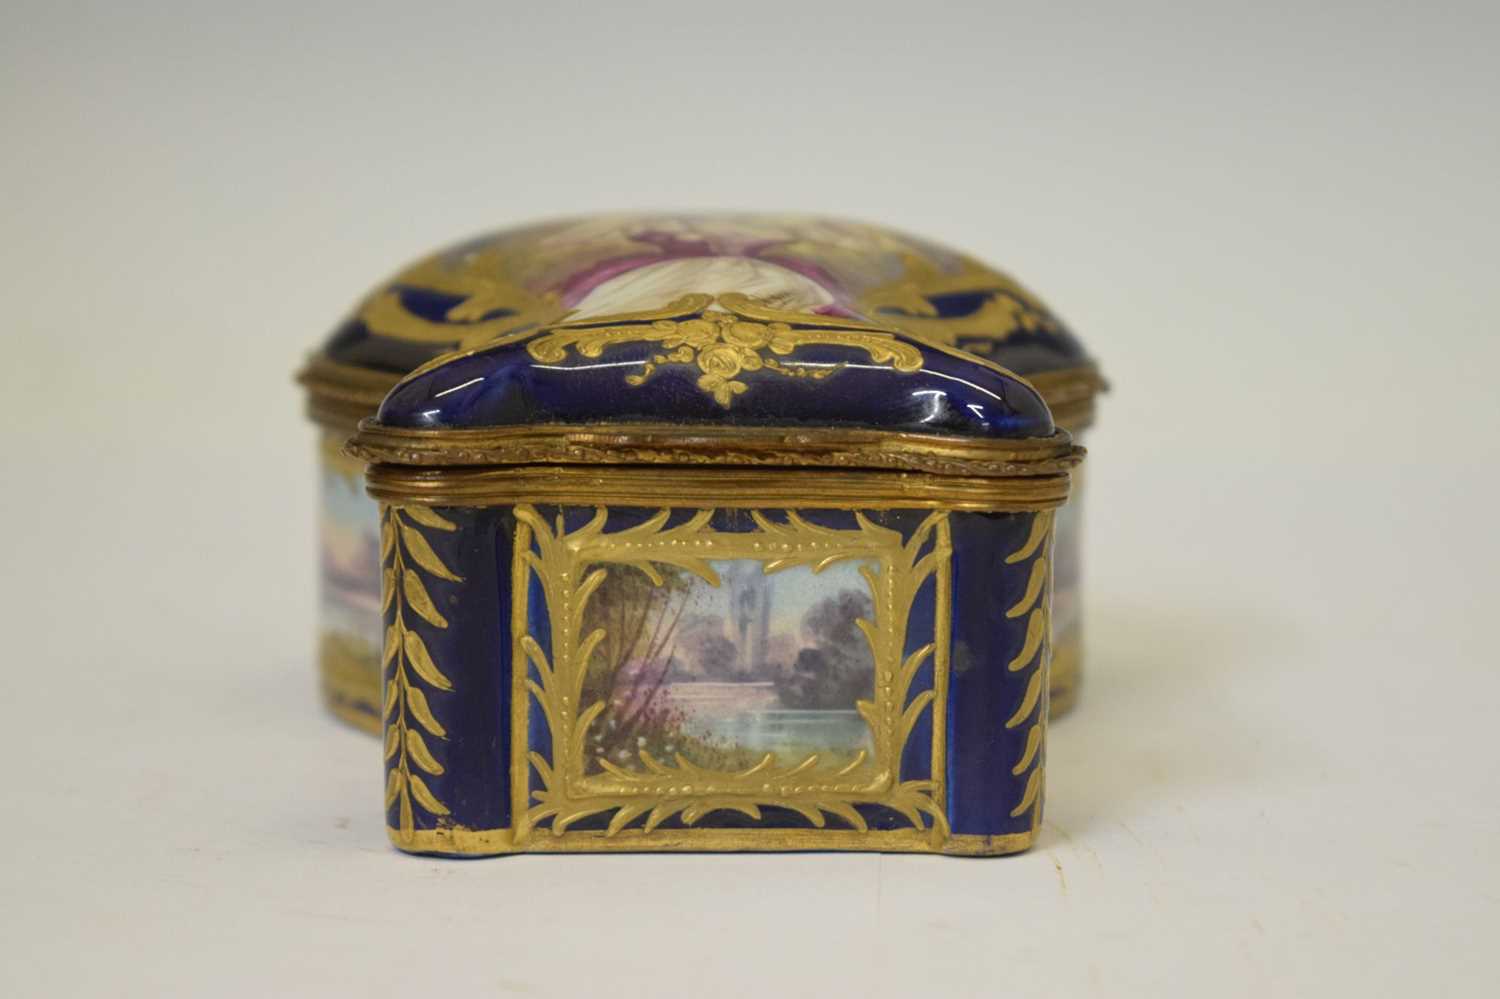 18th century-style porcelain and gilt metal box - Image 2 of 8